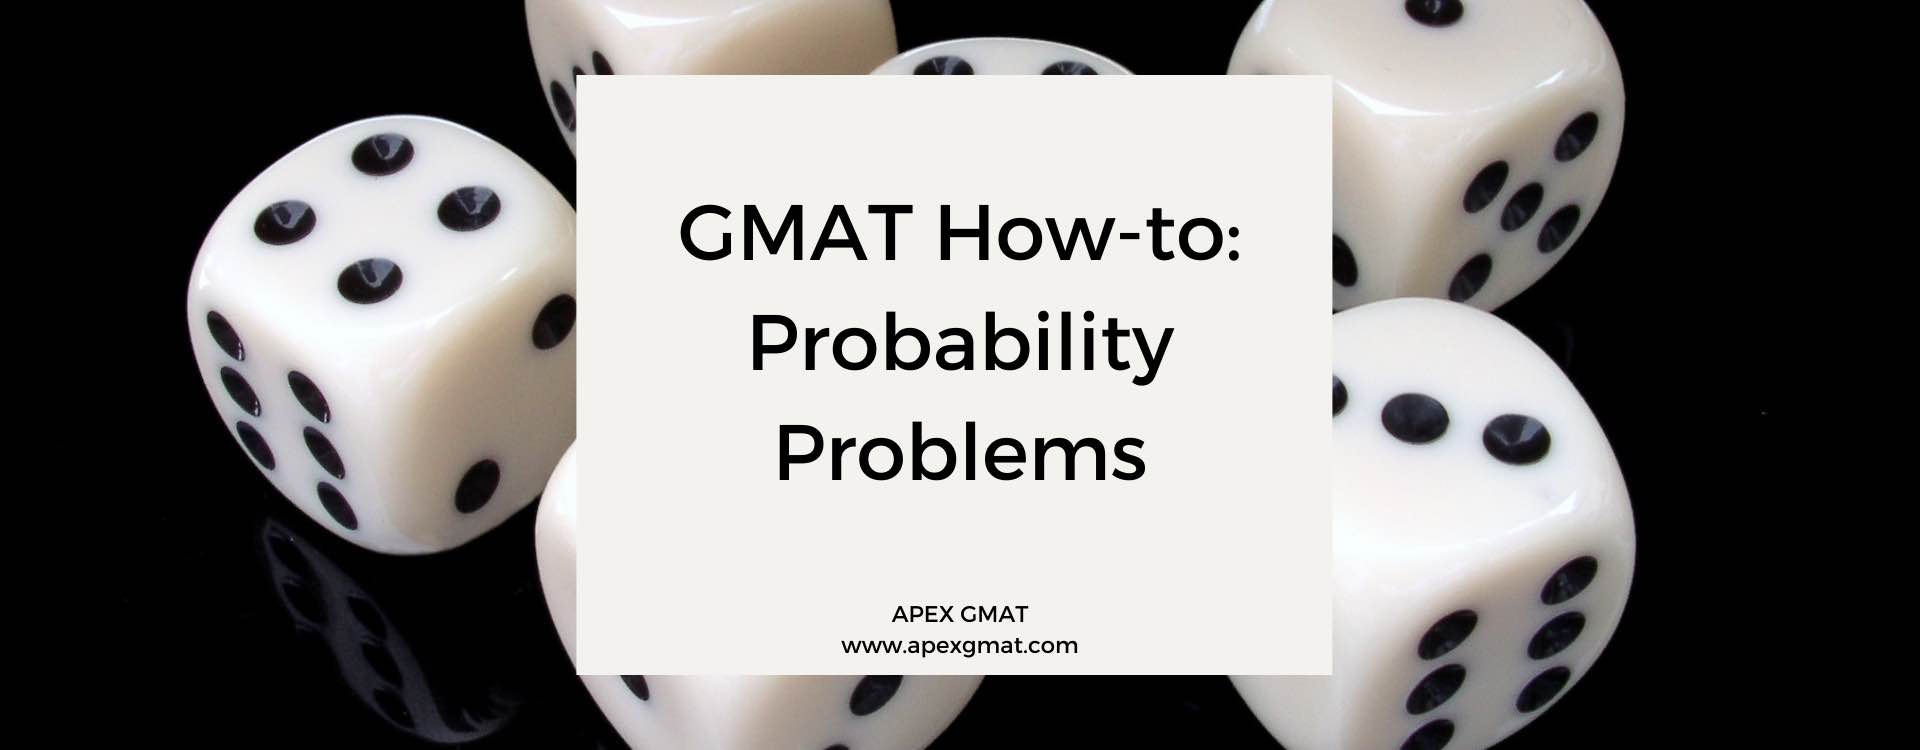 GMAT How-to: Probability Problems